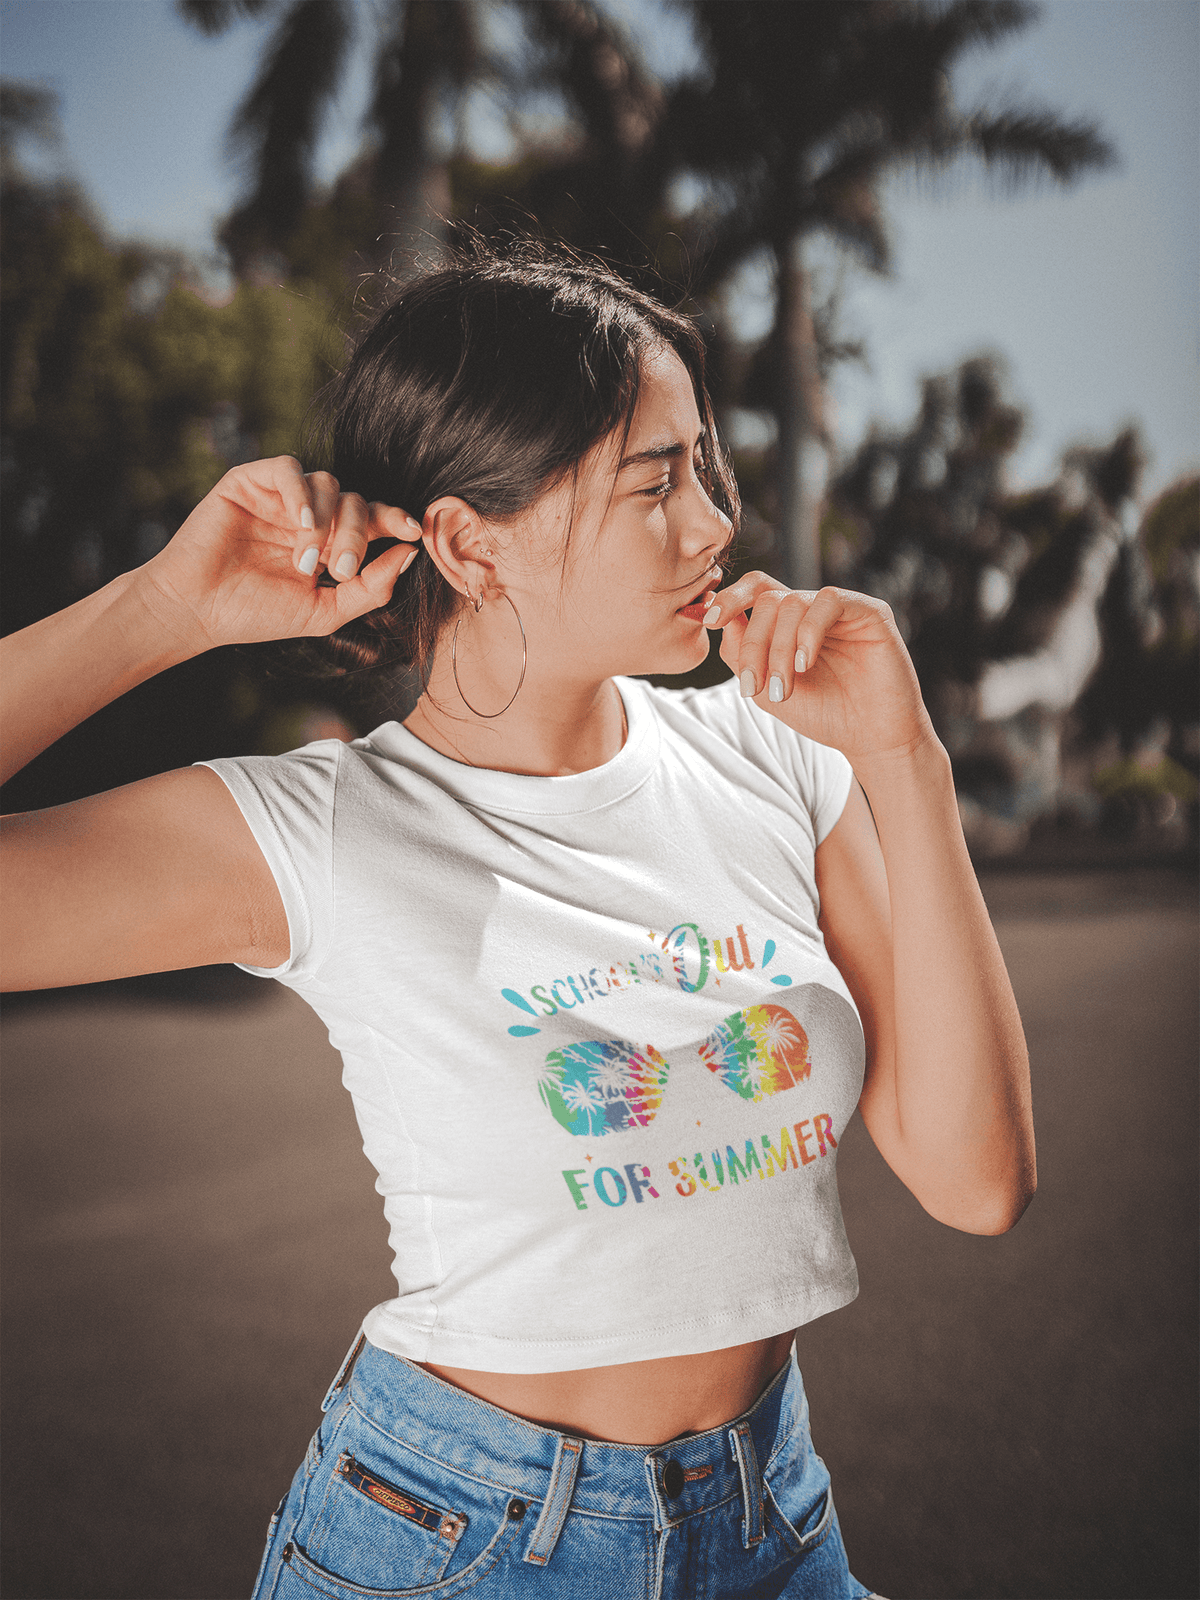 Schools Out For Summer - Cropped T-Shirt-Cropped Tees-StylinArts